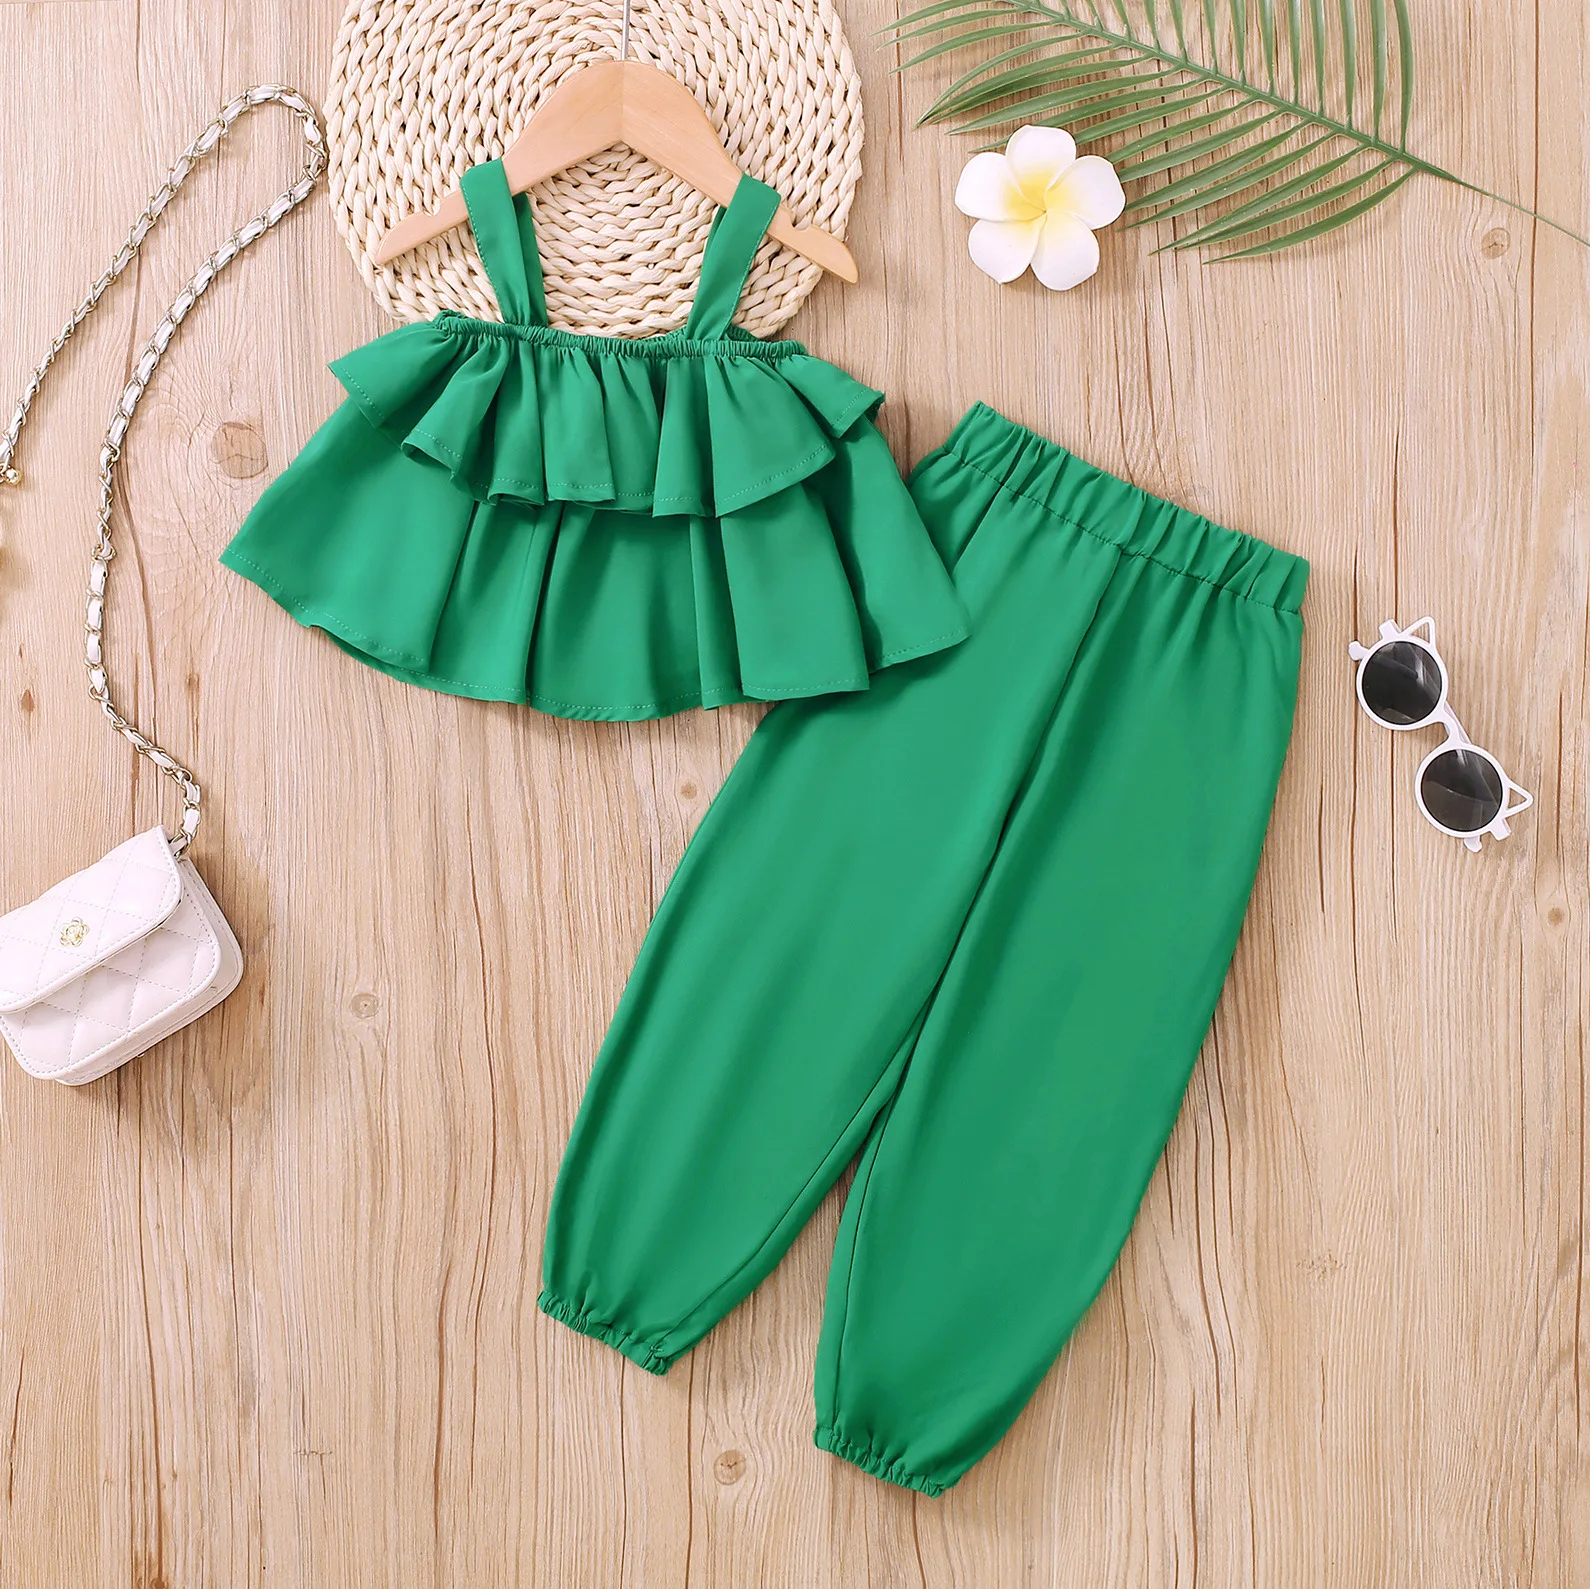 

2023 New Child Clothes Sets Sleeveless Ruffles Tops Green Pants 2 Piece Sets Designer Girls Clothes Set 18M-7T